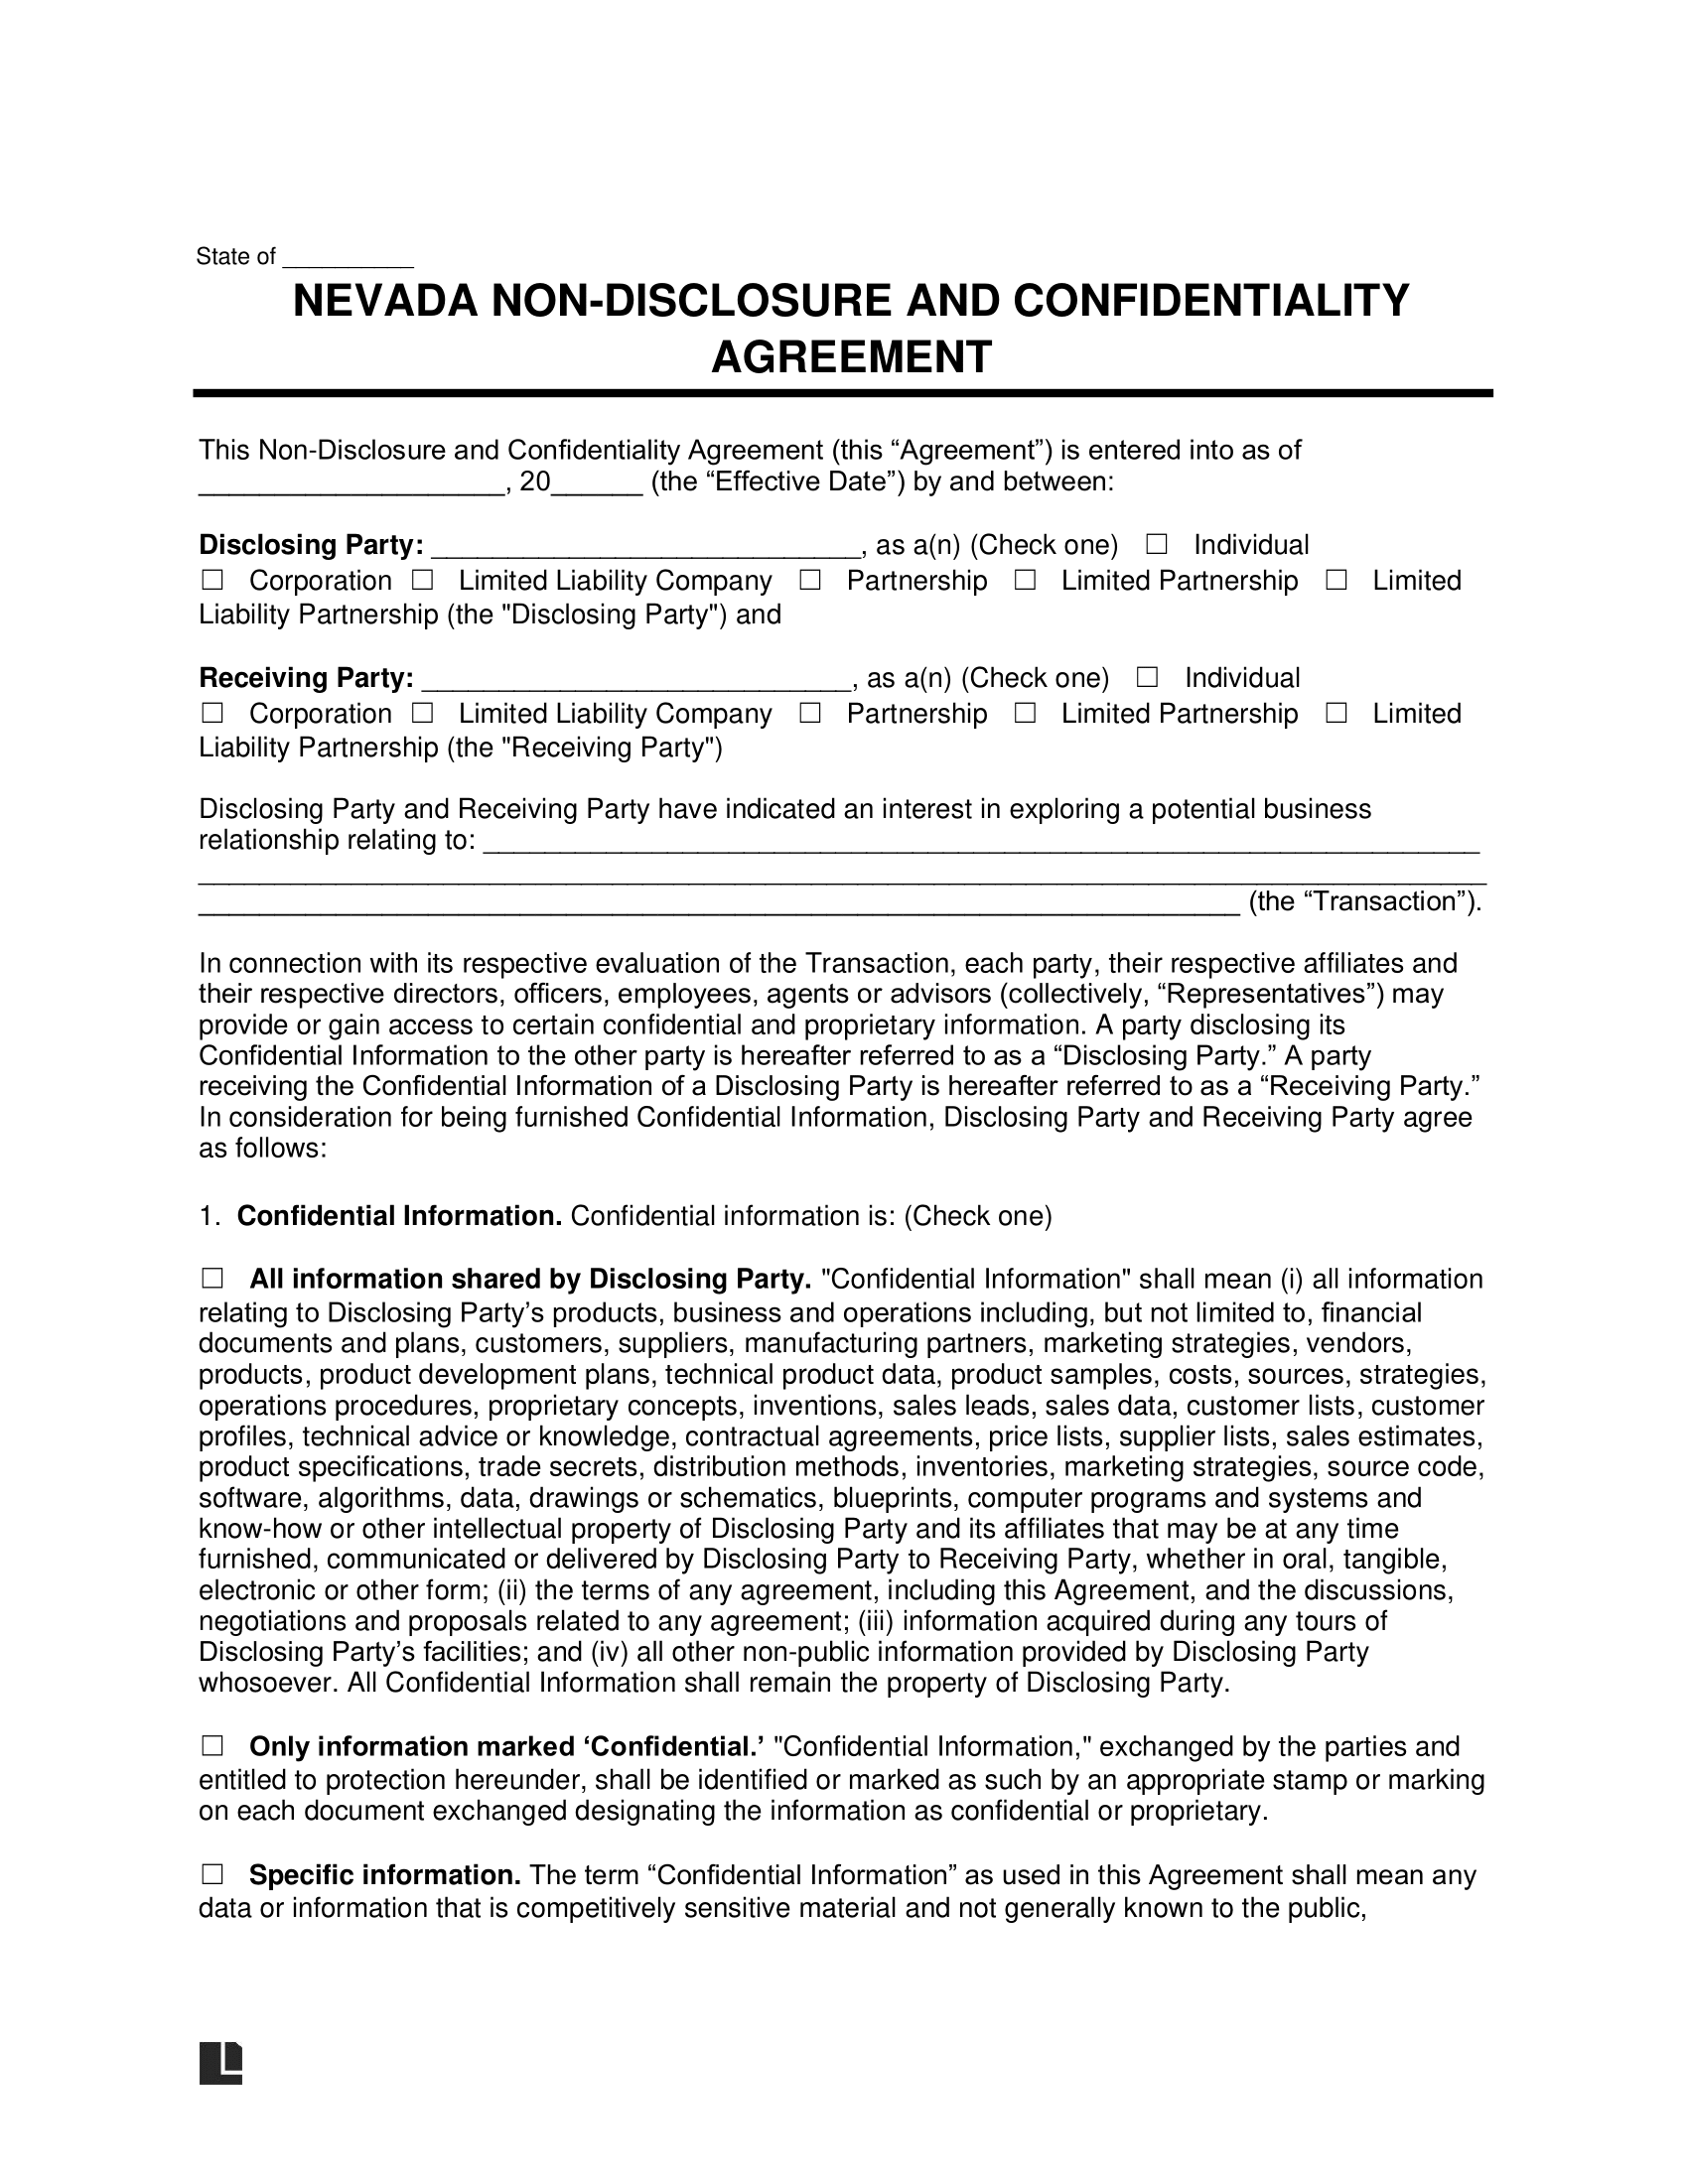 Nevada Non-Disclosure and Confidentiality Agreement Template